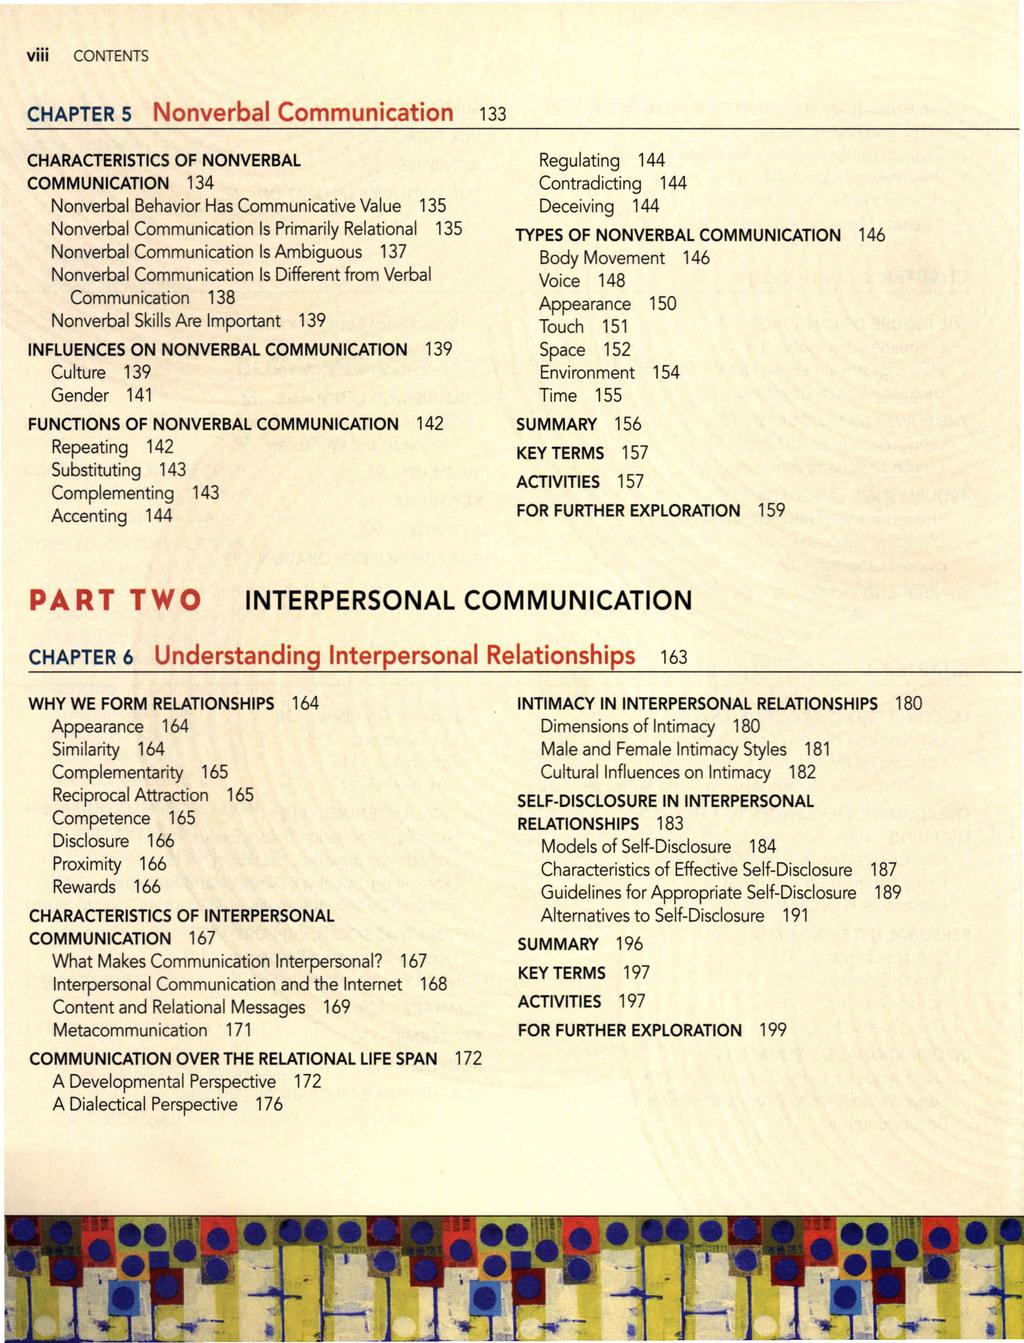 viii CONTENTS CHAPTER 5 Nonverbal Communication 133 CHARACTERISTICS OF NONVERBAL COMMUNICATION 134 Nonverbal Behavior Has Communicative Value 135 Nonverbal Communication Is Primarily Relational 135